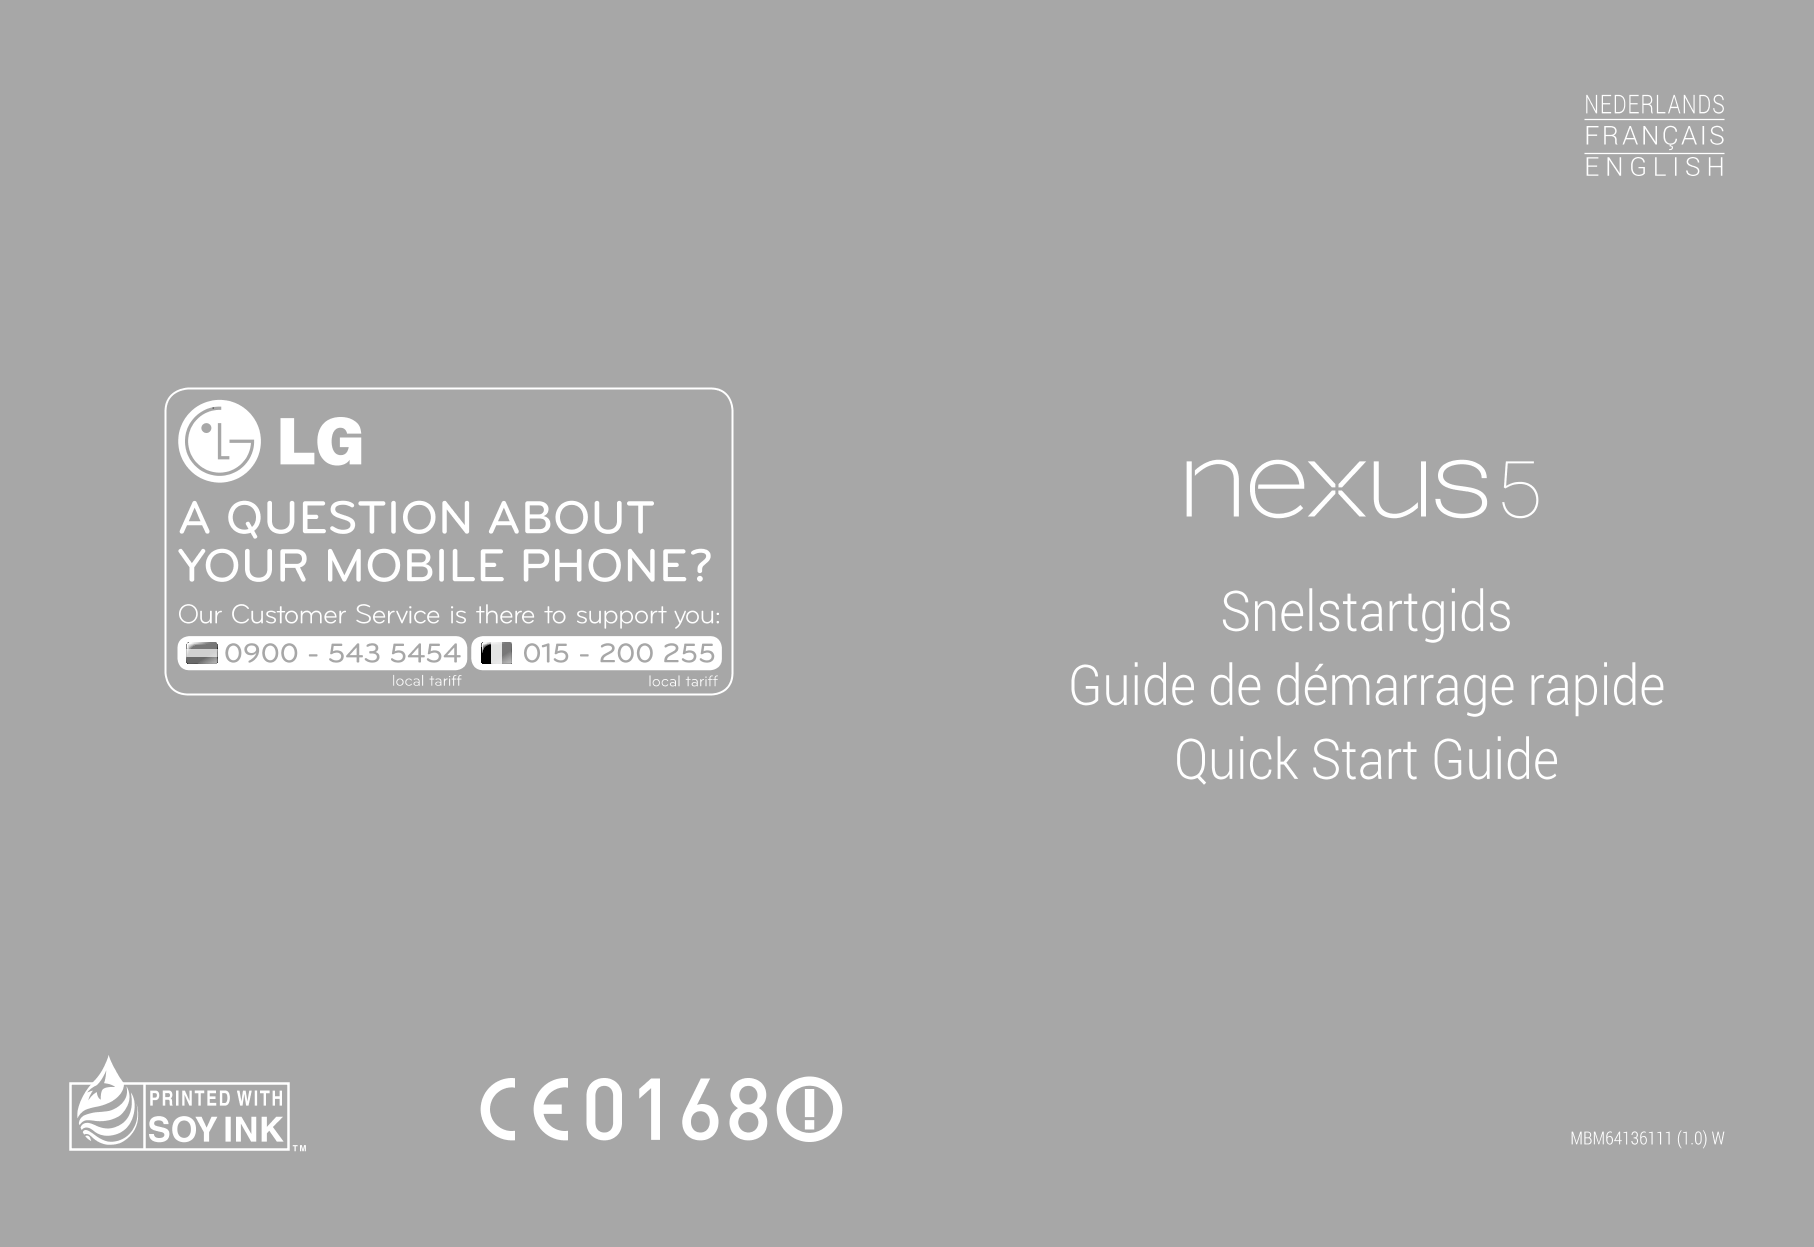 NEDERLANDS
FRANÇAIS
E N G L I S H
A QUESTION ABOUT   
YOUR MOBILE PHONE?
Our Customer Service is there to support you: Snelstart